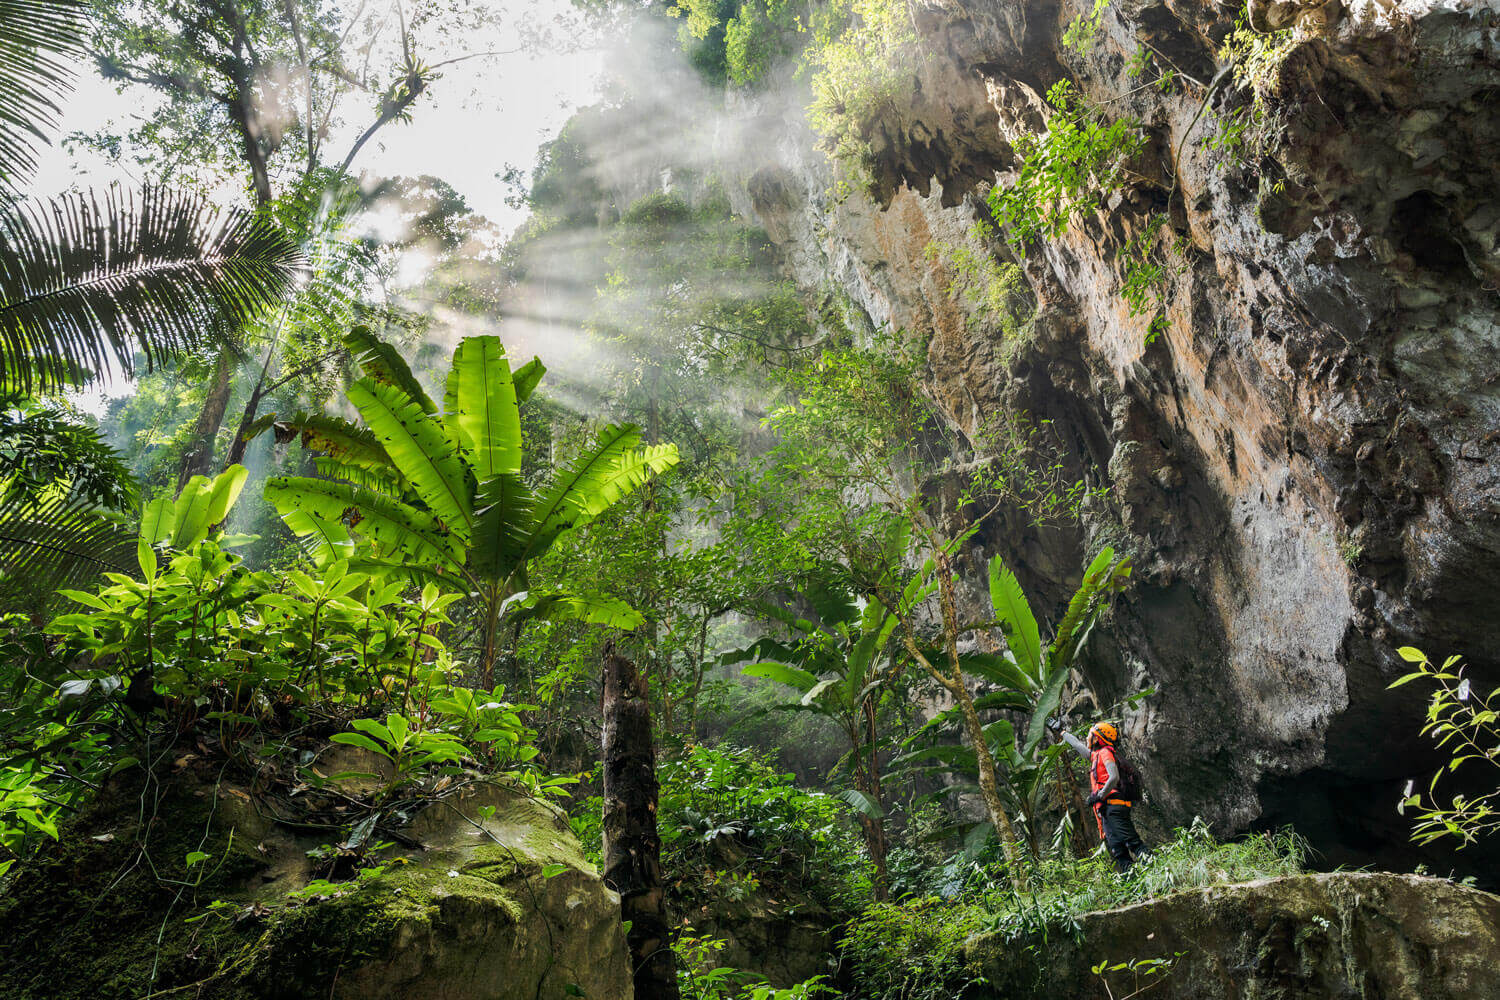 A dense forest is right in front of the Son Doong Cave entrance